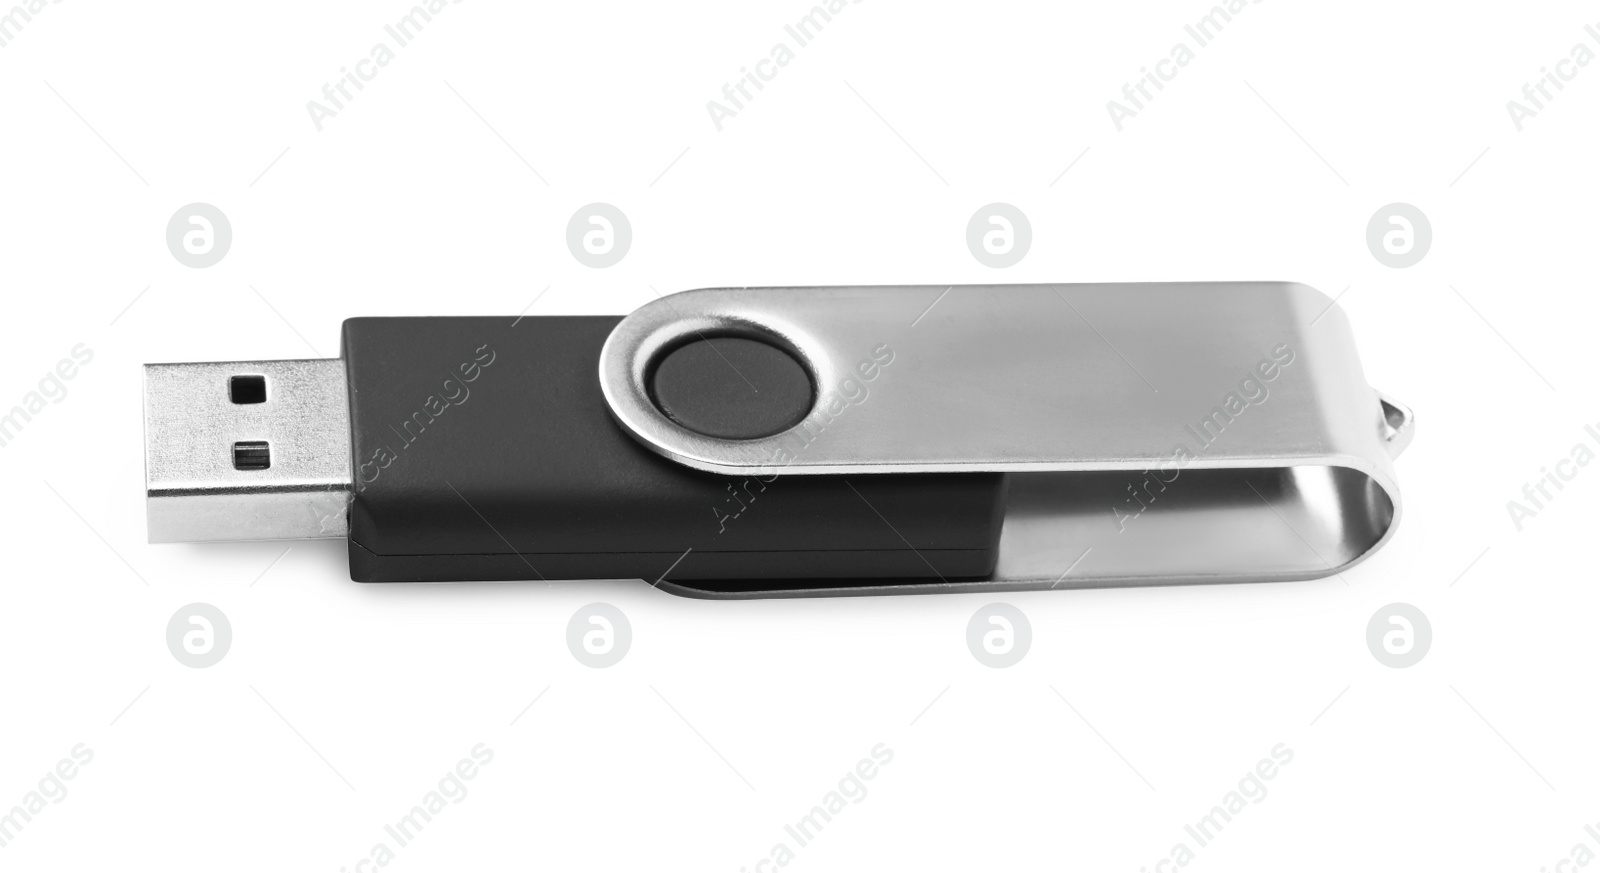 Photo of Modern usb flash drive isolated on white